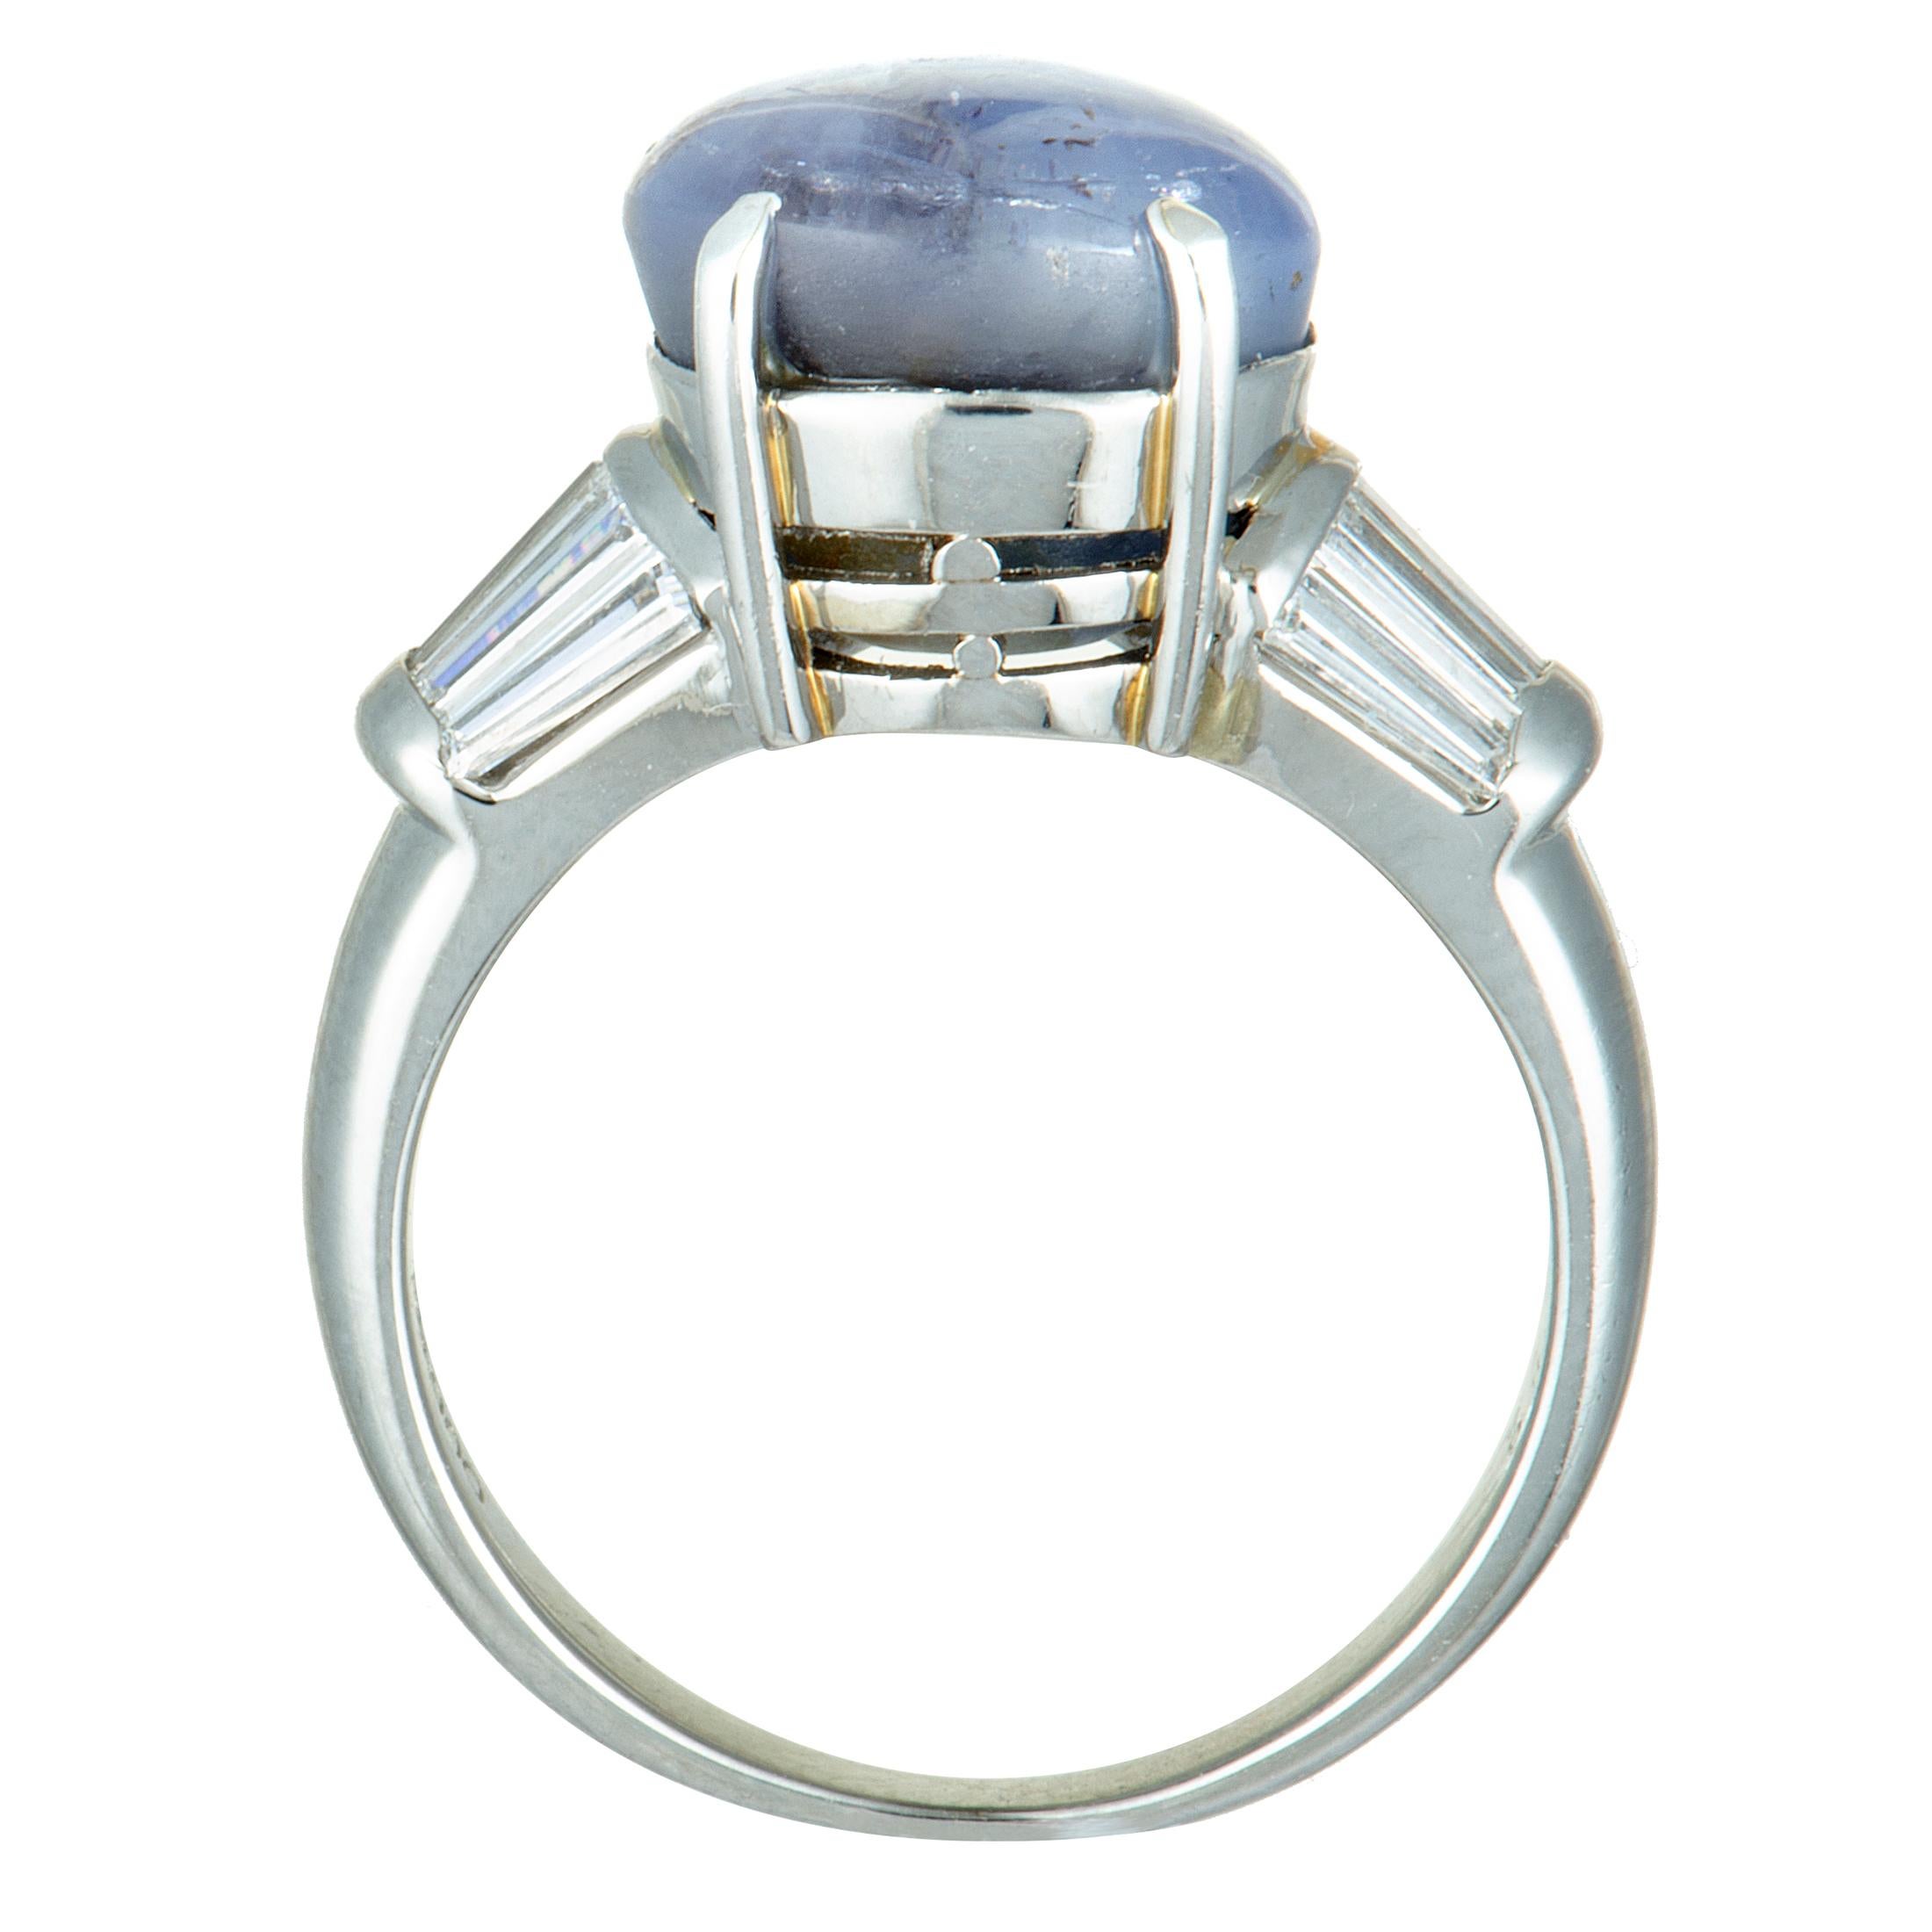 A wonderfully classy design is beautifully presented in luxurious platinum in this exceptional jewelry piece that offers a splendidly refined appearance. The ring is decorated with a sublime sapphire that weighs 10.56 carats and with exquisite